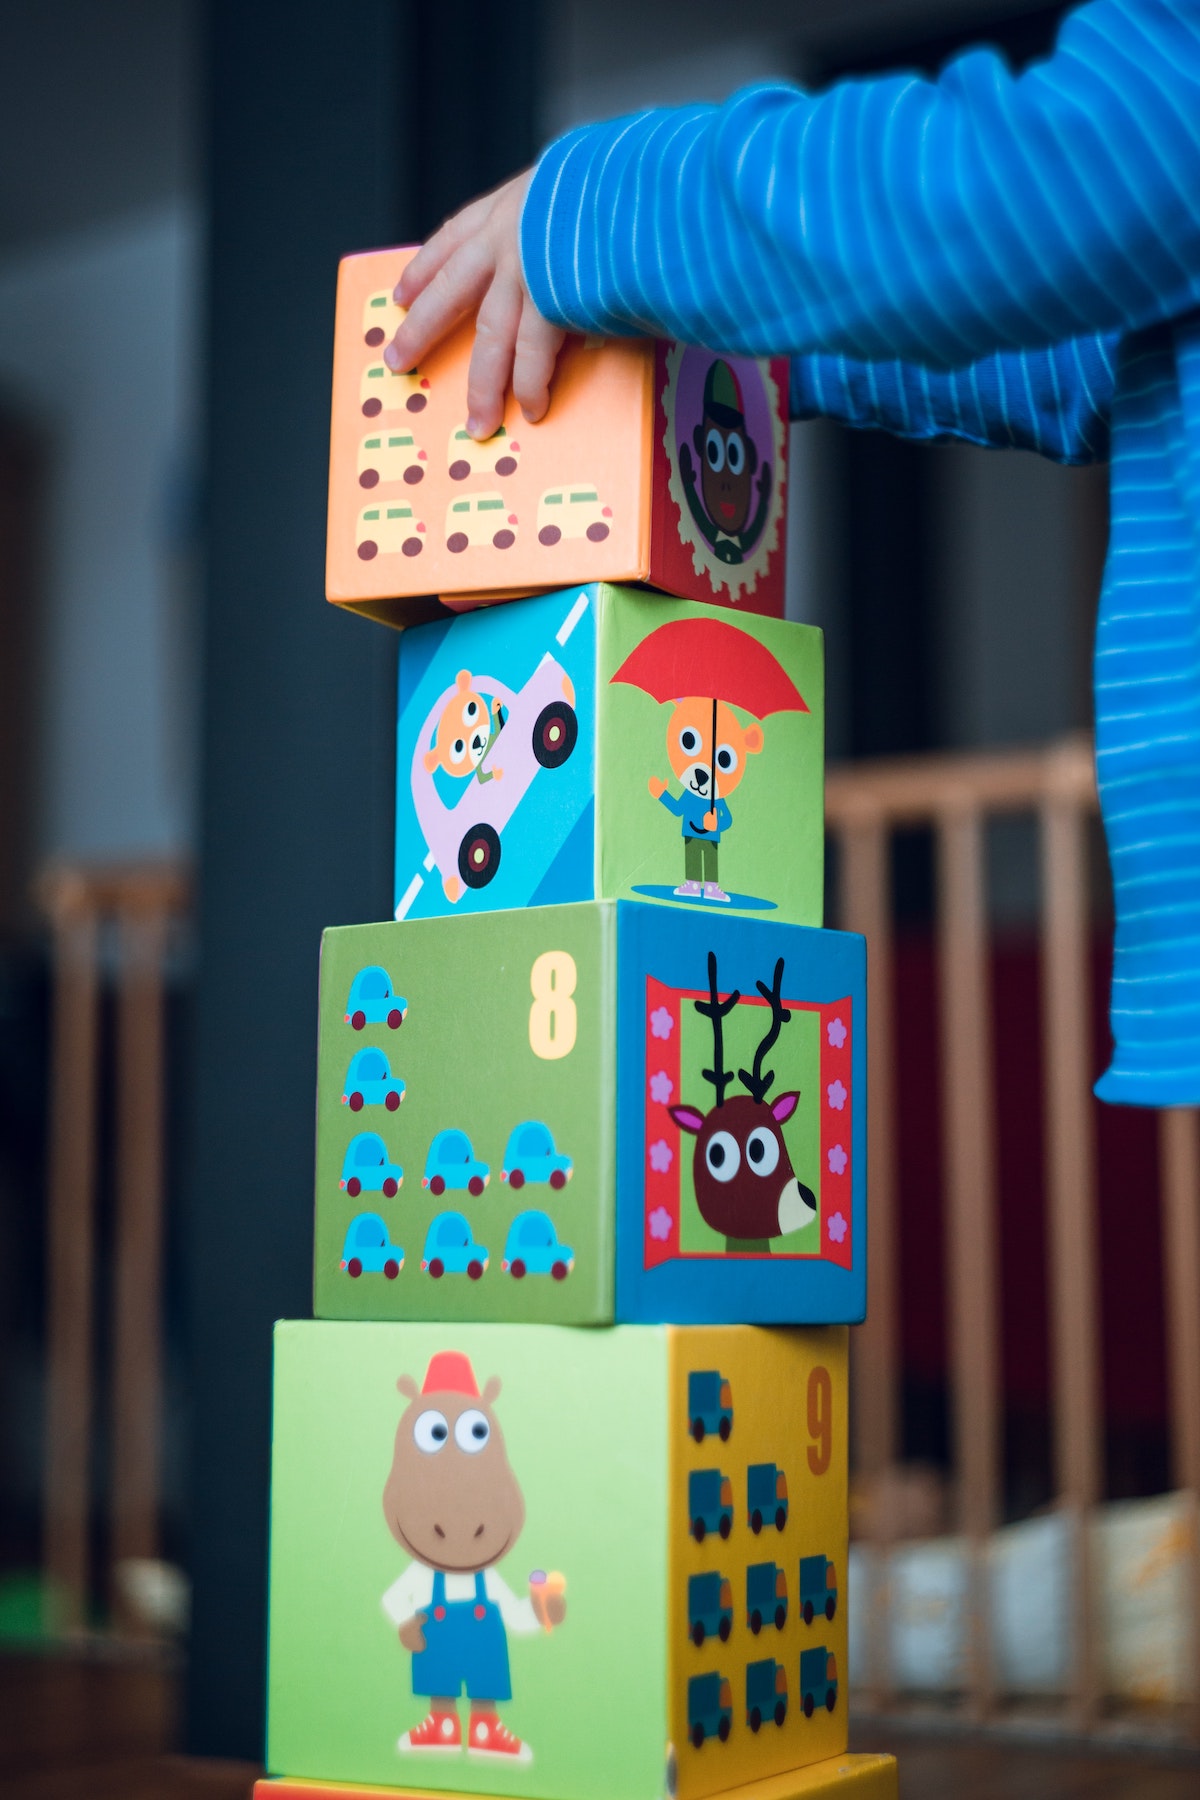 A child stacking large colorful blocks